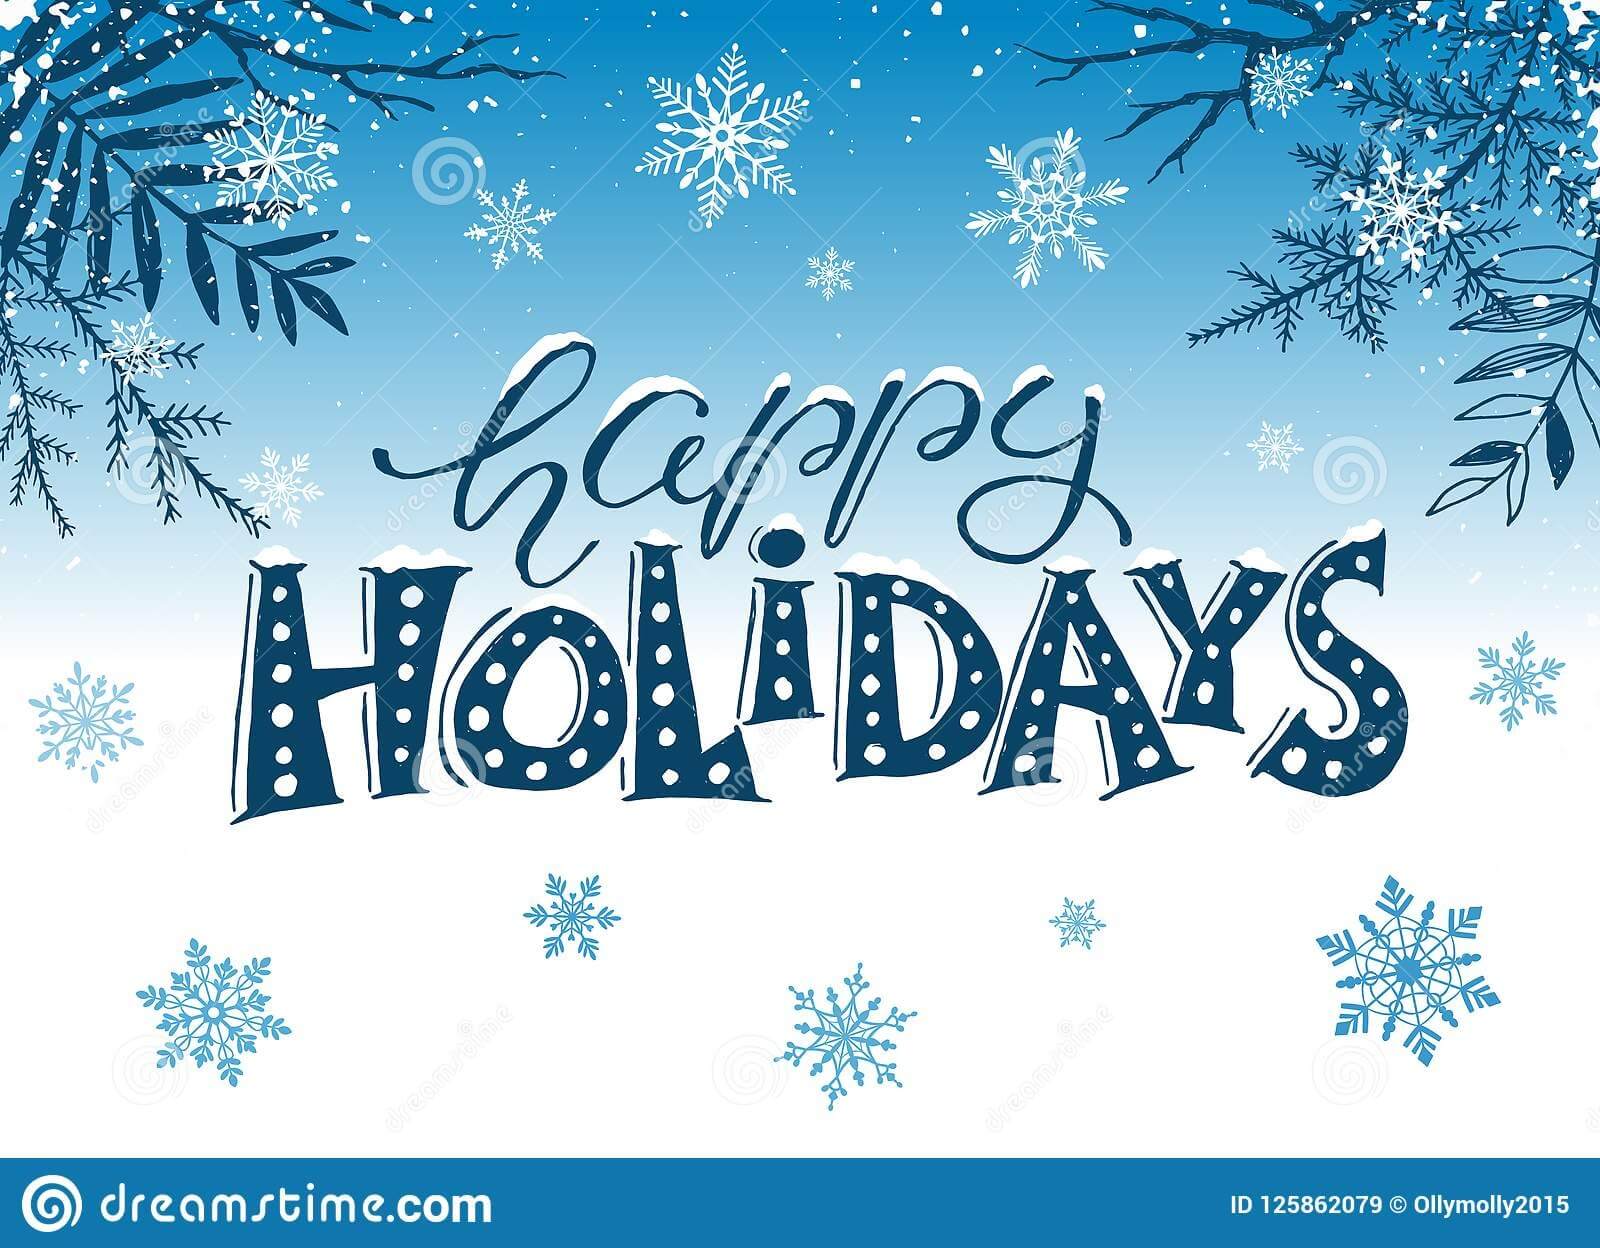 Happy Holidays Greeting Card Stock Vector – Illustration Of For Happy Holidays Card Template